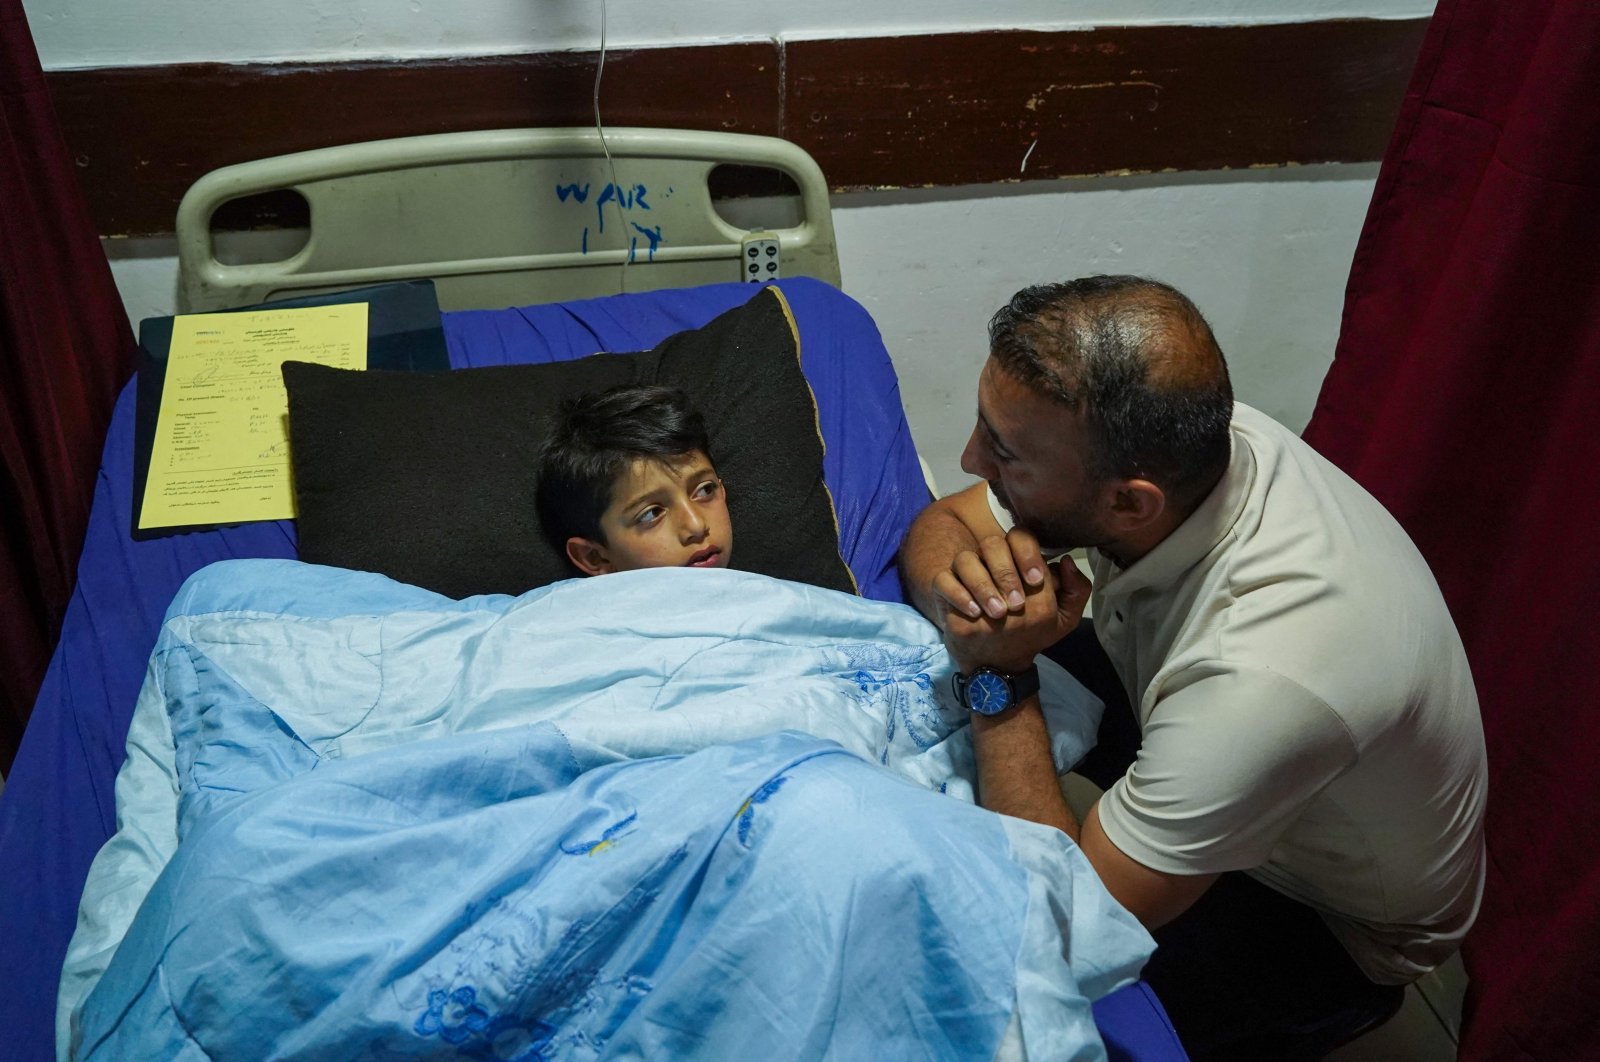 A relative checks on Sipan Farhad, a 9-year-old wounded following a rocket attack in the Kurdistan Regional Government (KRG) of Iraq, at a hospital in the northern Iraqi city of Dohuk, May 26, 2022. (AFP Photo)